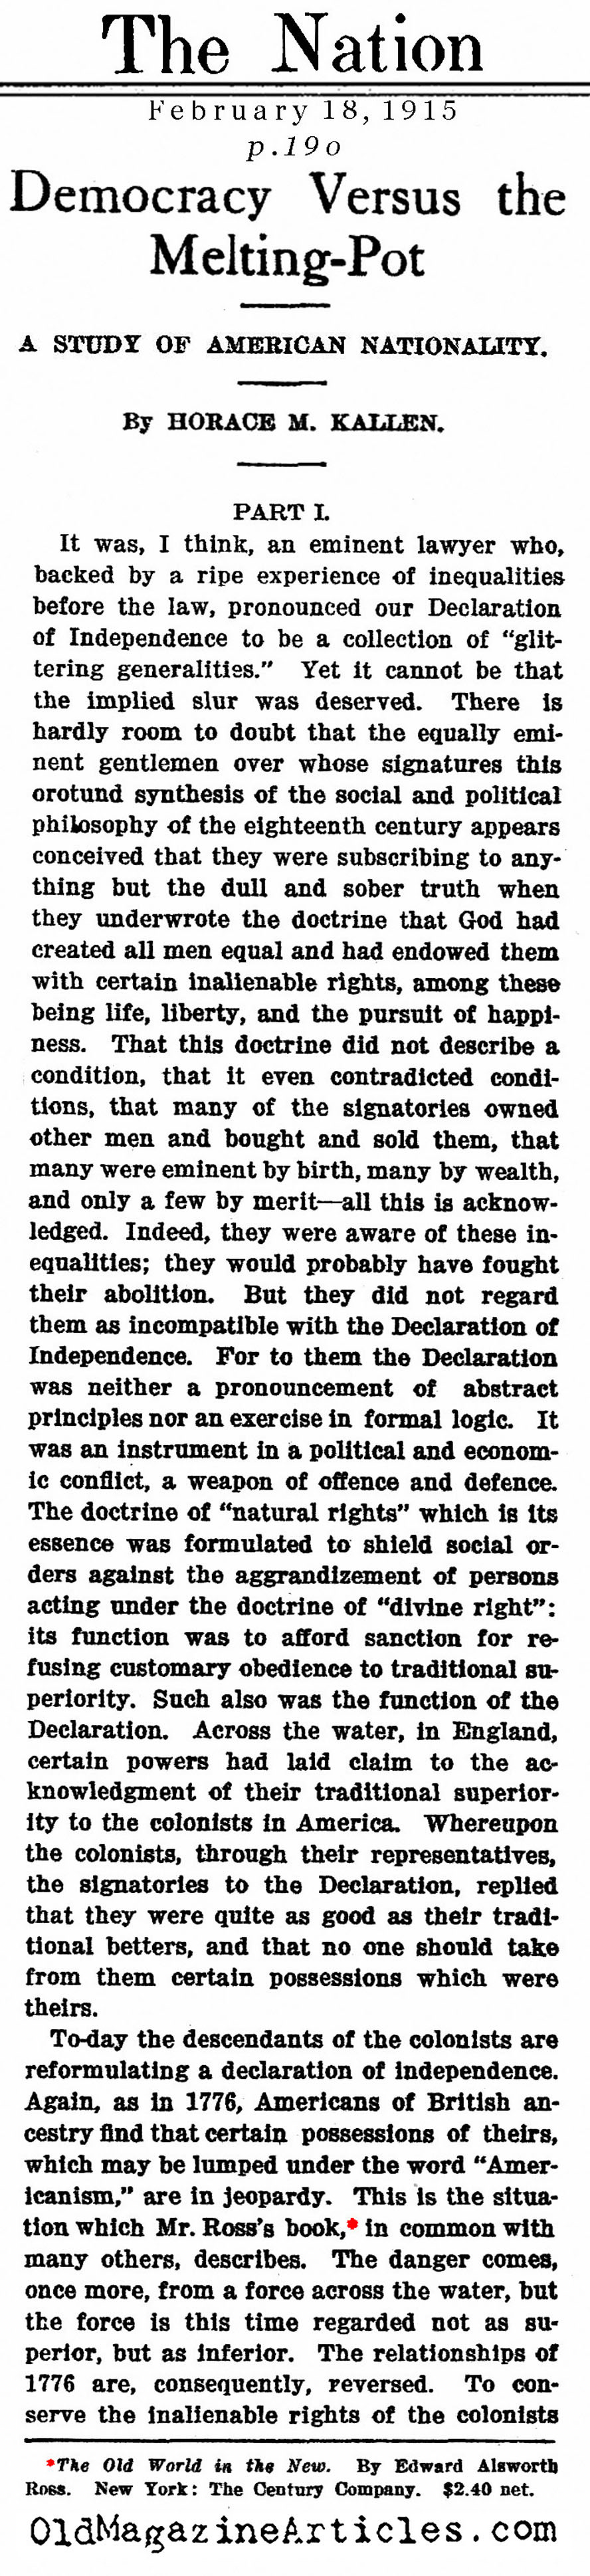 Anticipating Multiculturalism  (The Nation, 1915)